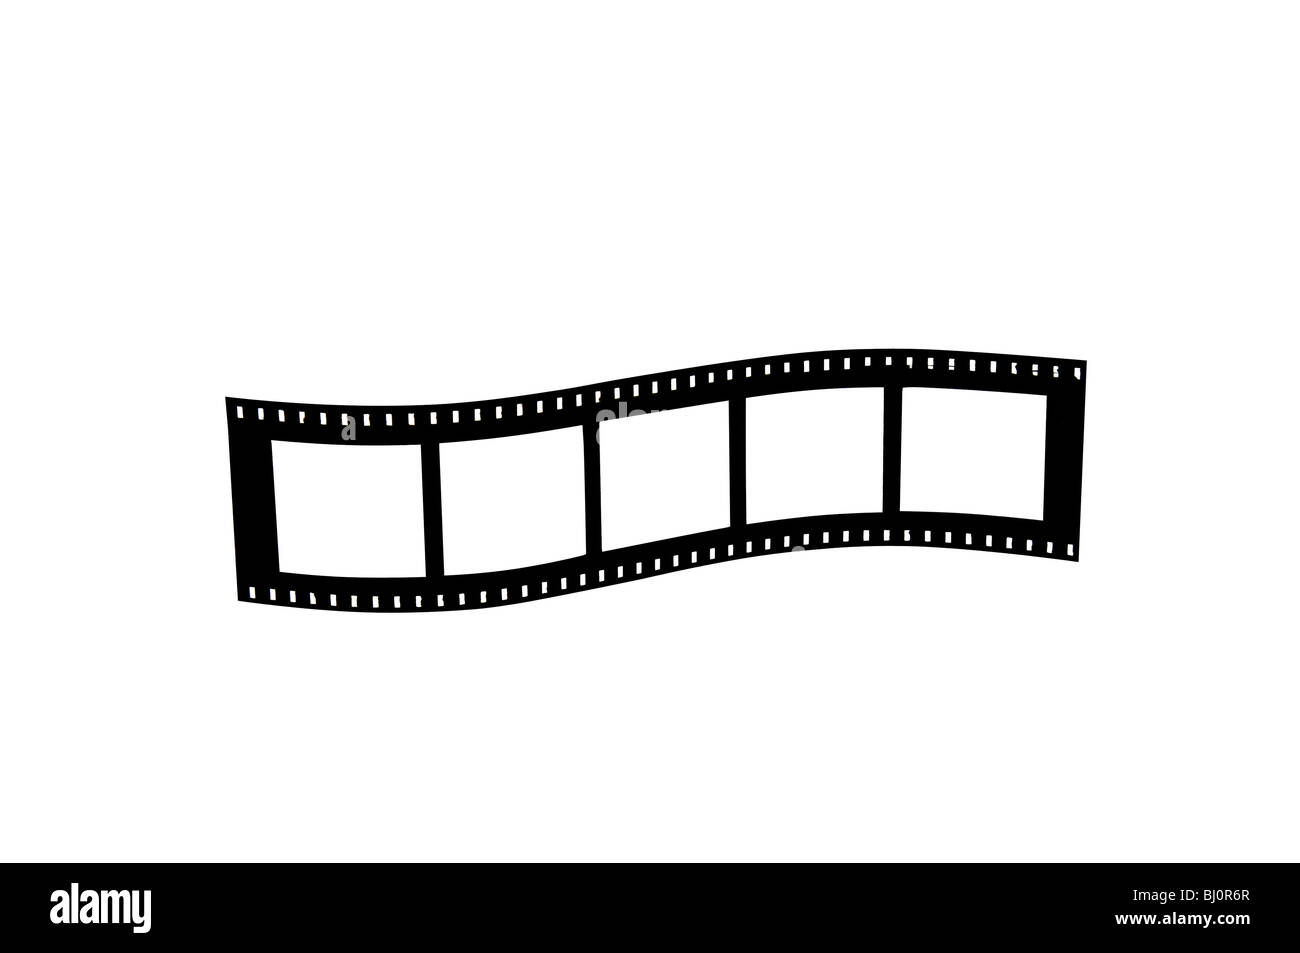 Film strip roll isolated on white background. Stock Photo